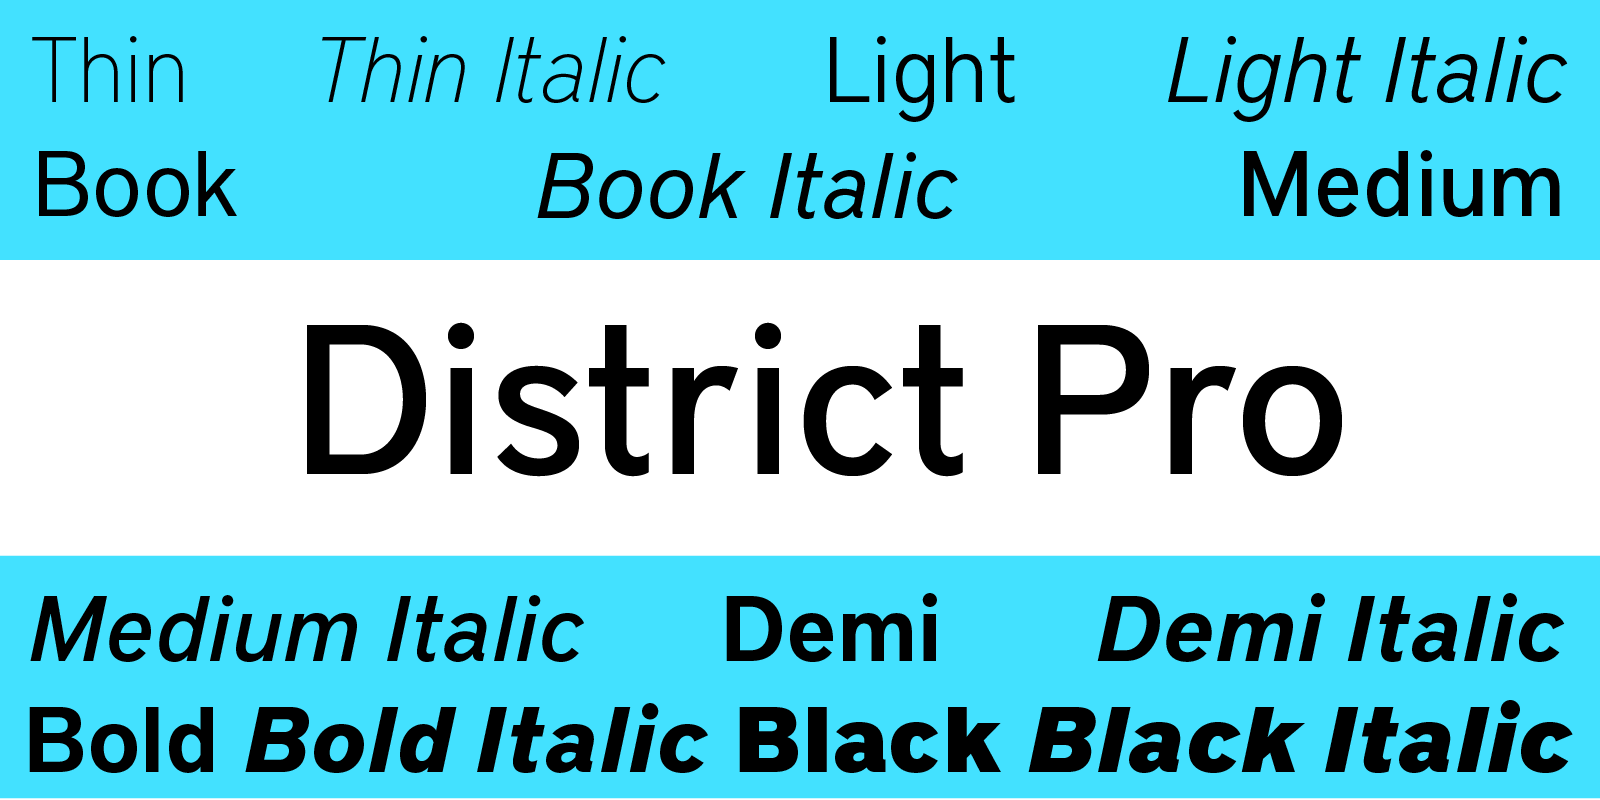 Are You a Slight, a Demi or a Bold?